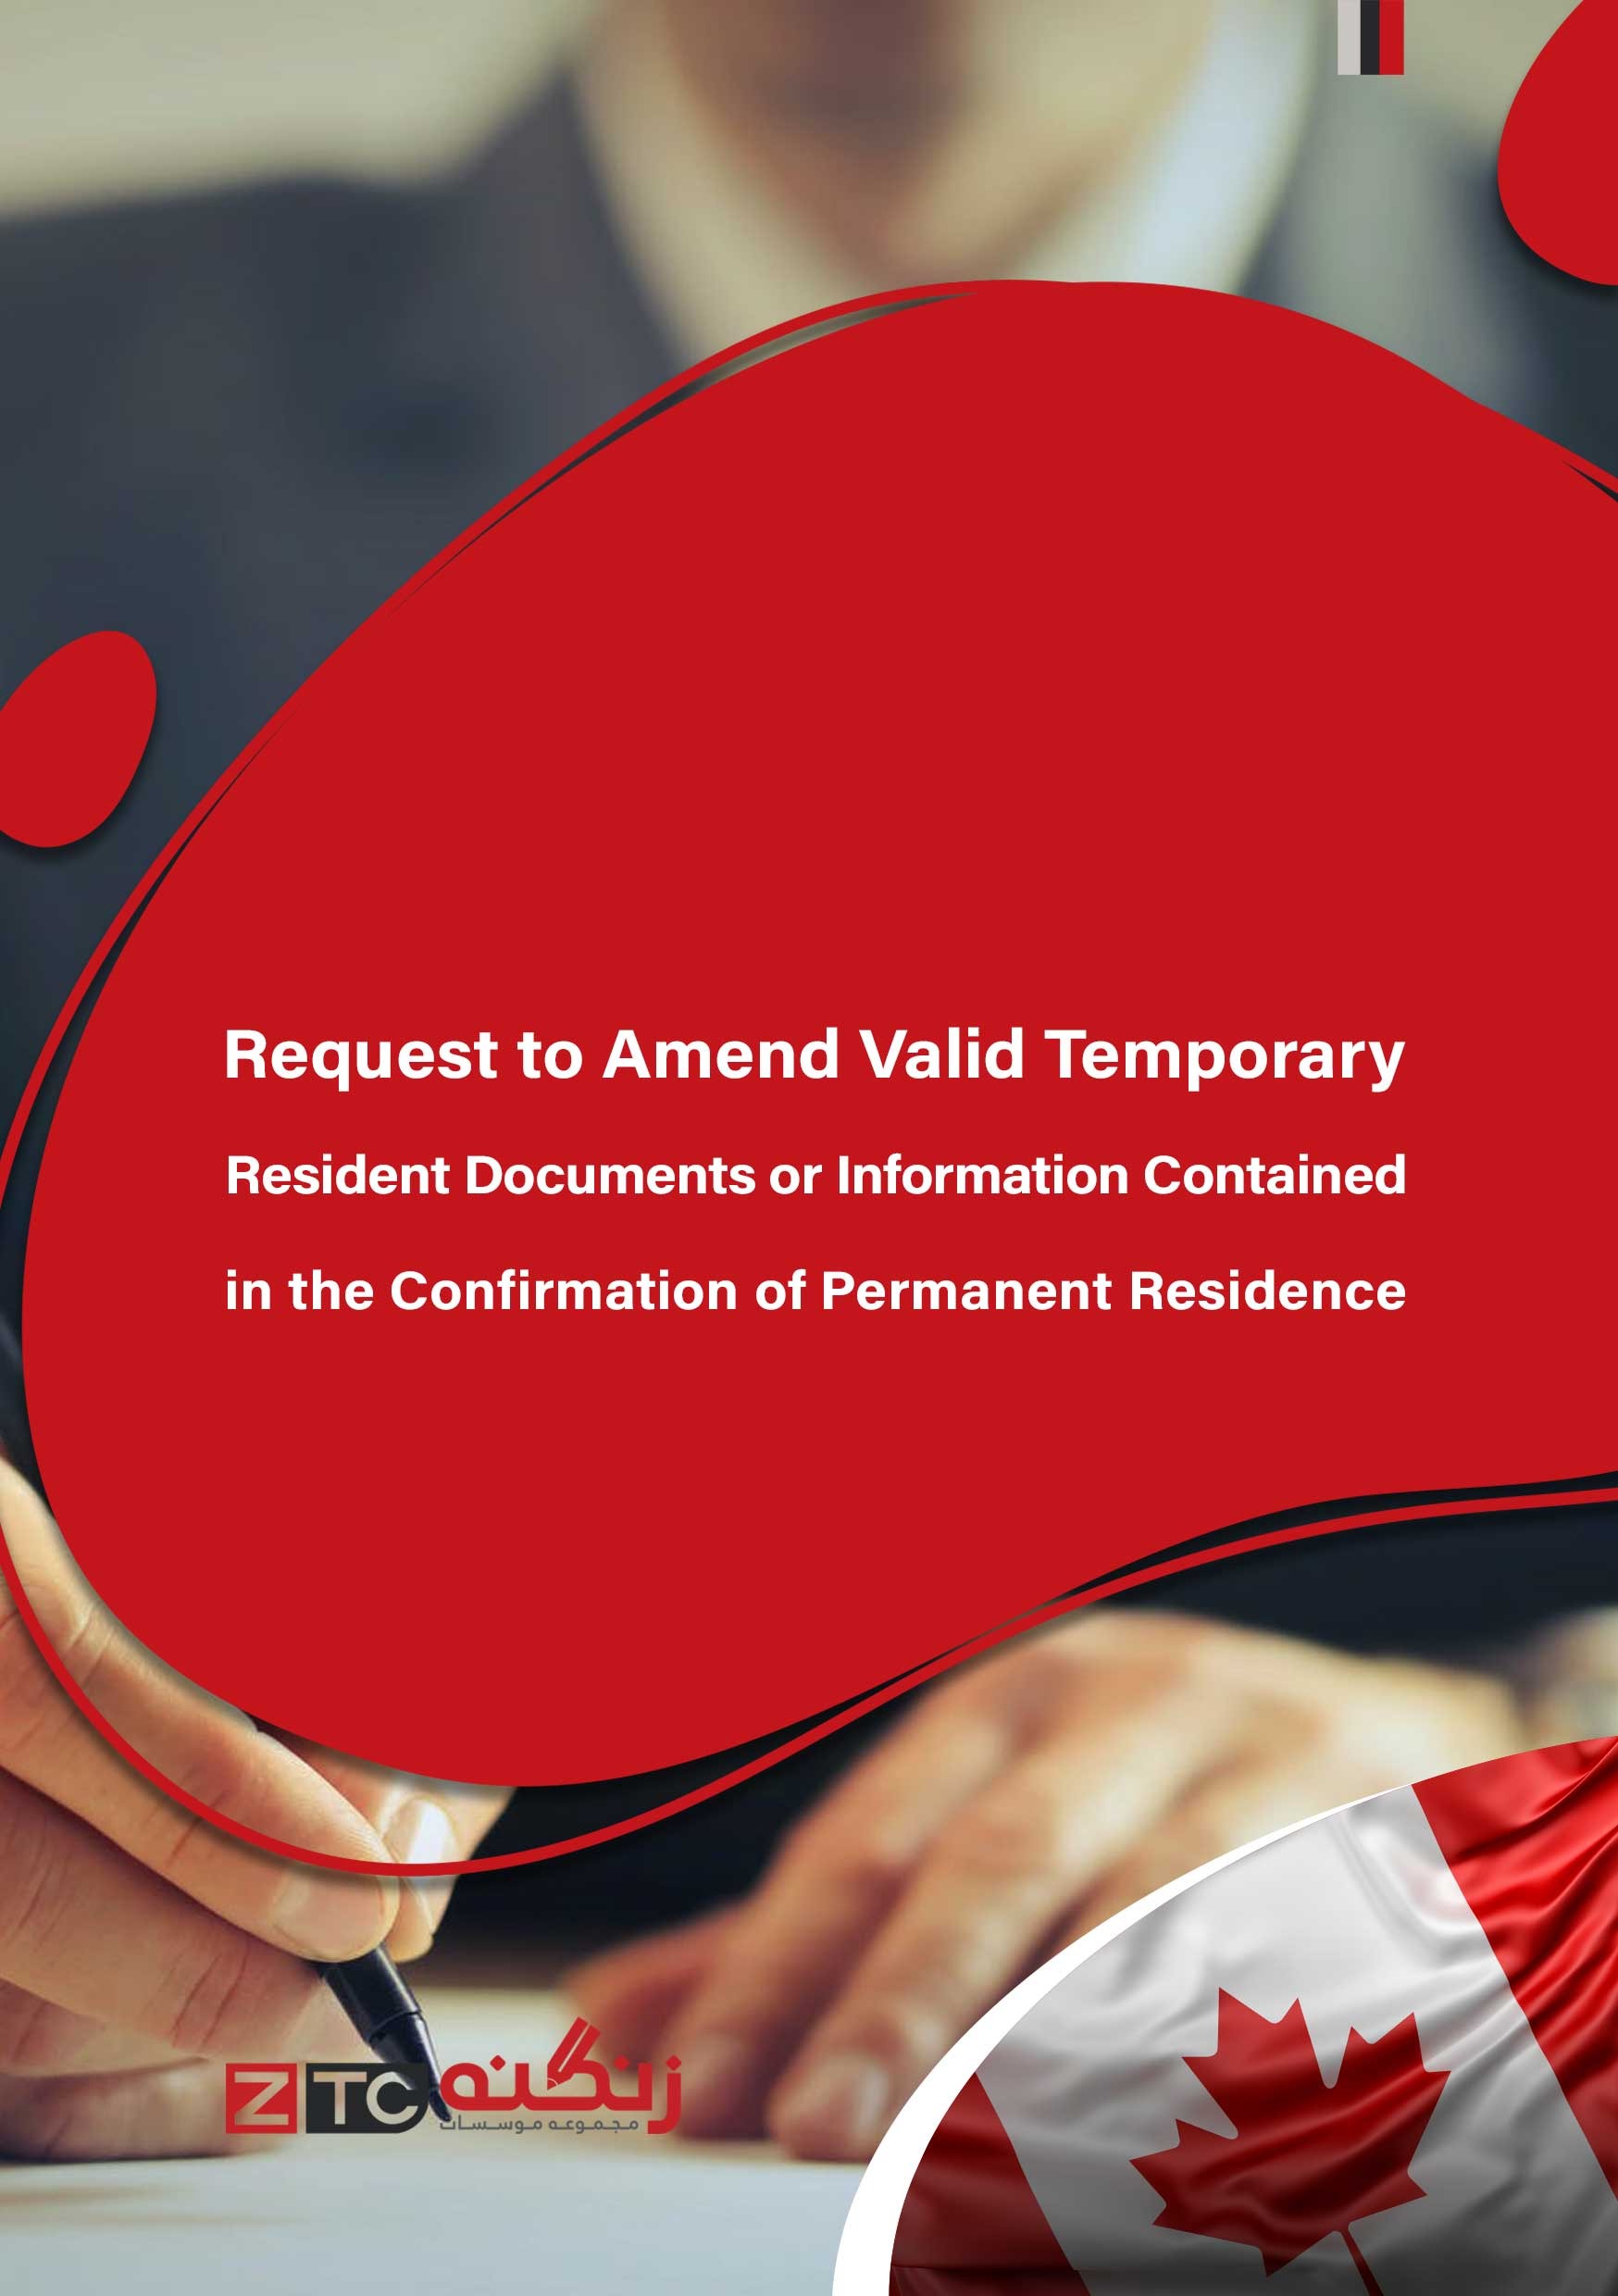 Request to Amend Valid Temporary Resident Documents or Information Contained in the Confirmation of Permanent Residence